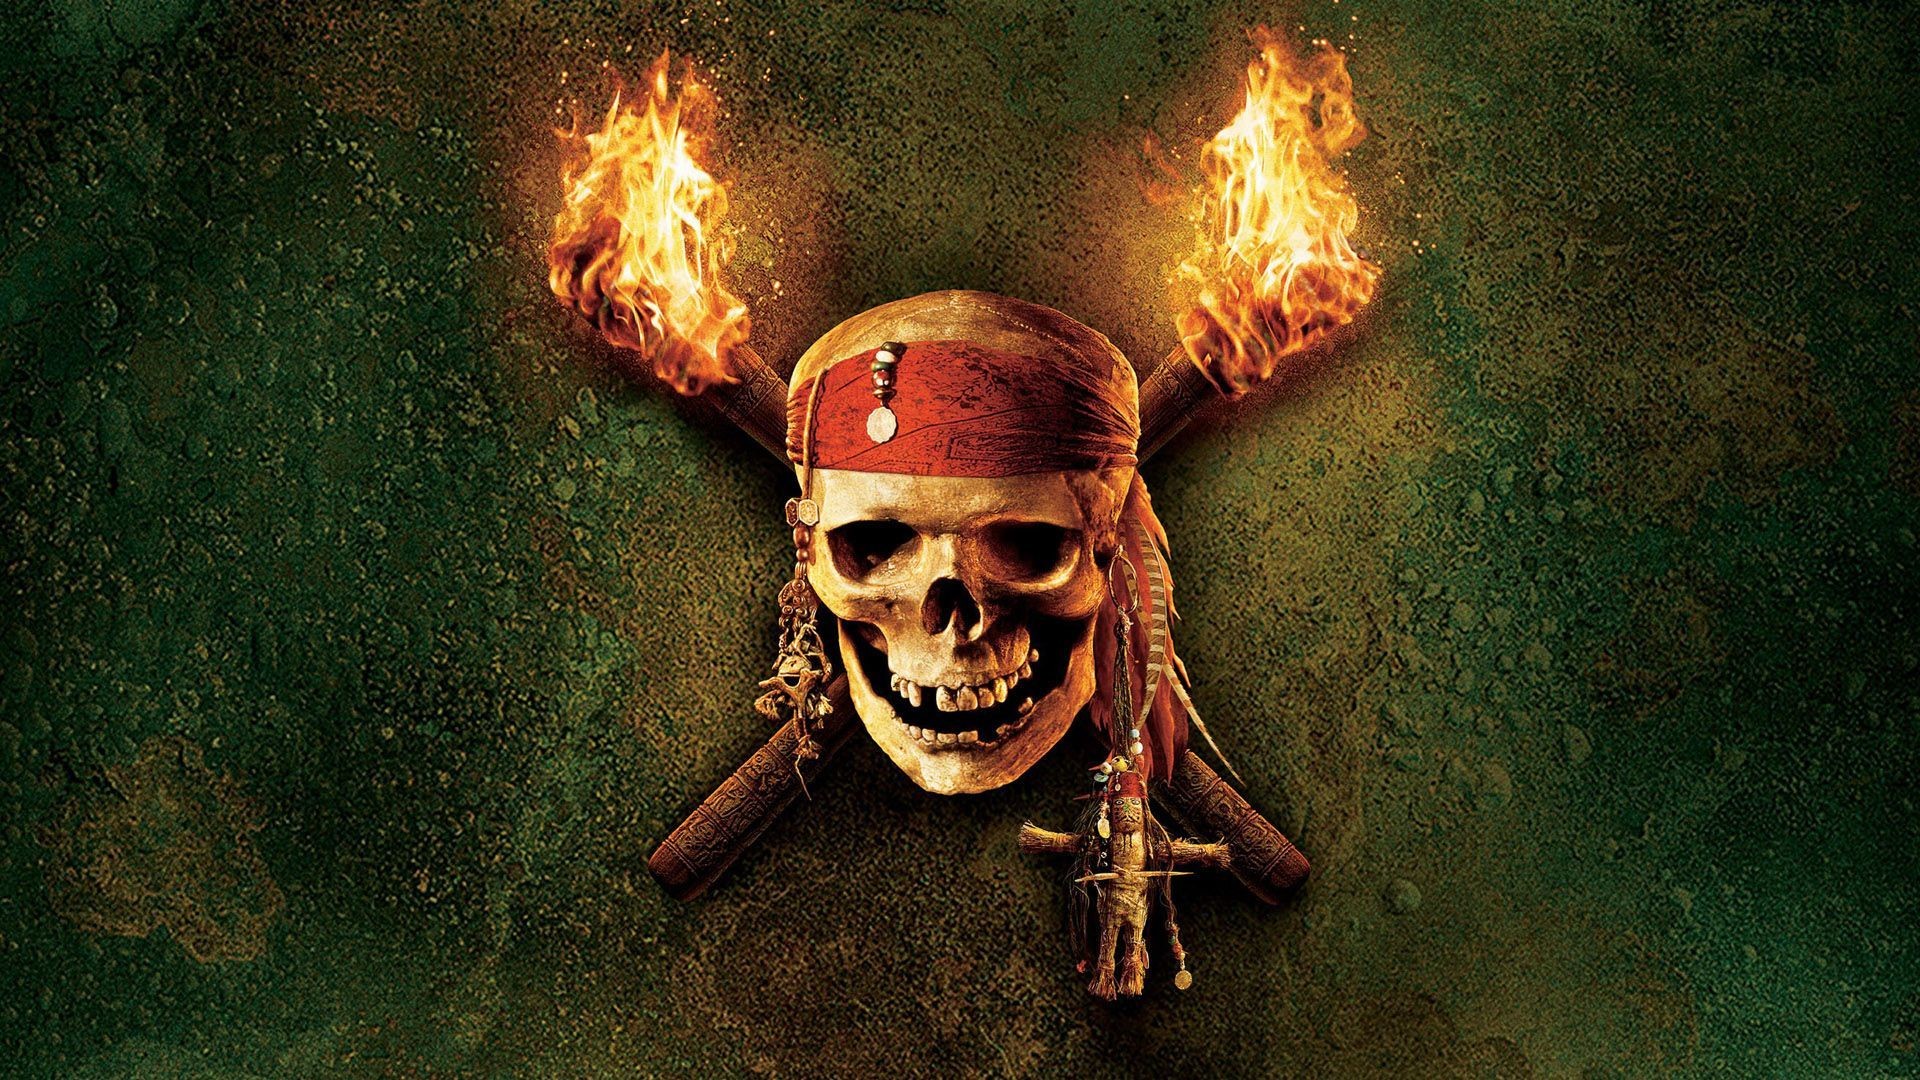 1920x1080 Pirates Of The Carribean Wallpapers - Wallpaper Cave